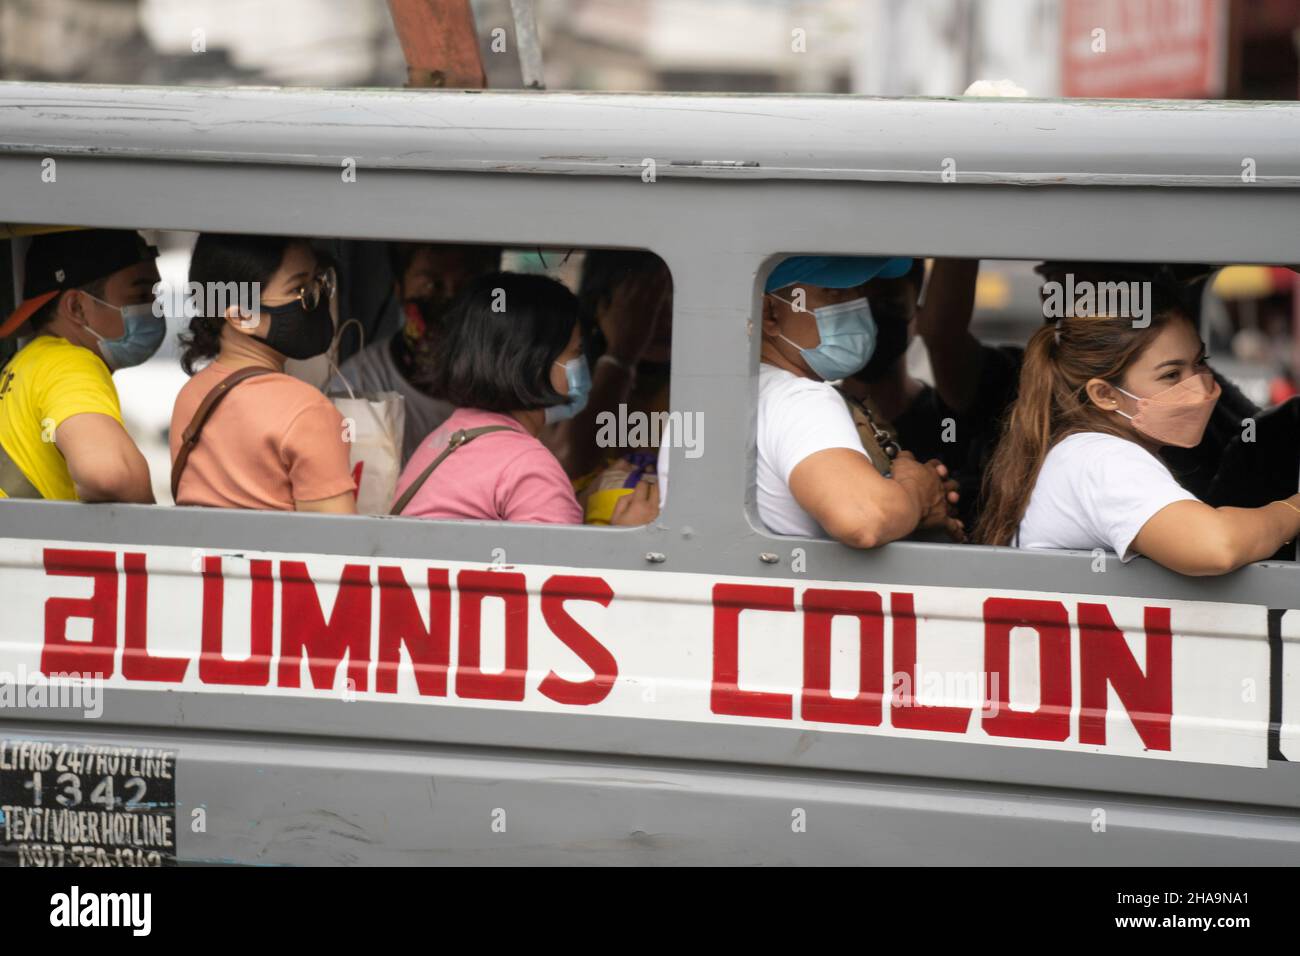 Commuters in the Philippines wearing face masks as they ride a public transport vehicle known as a multicab. Stock Photo